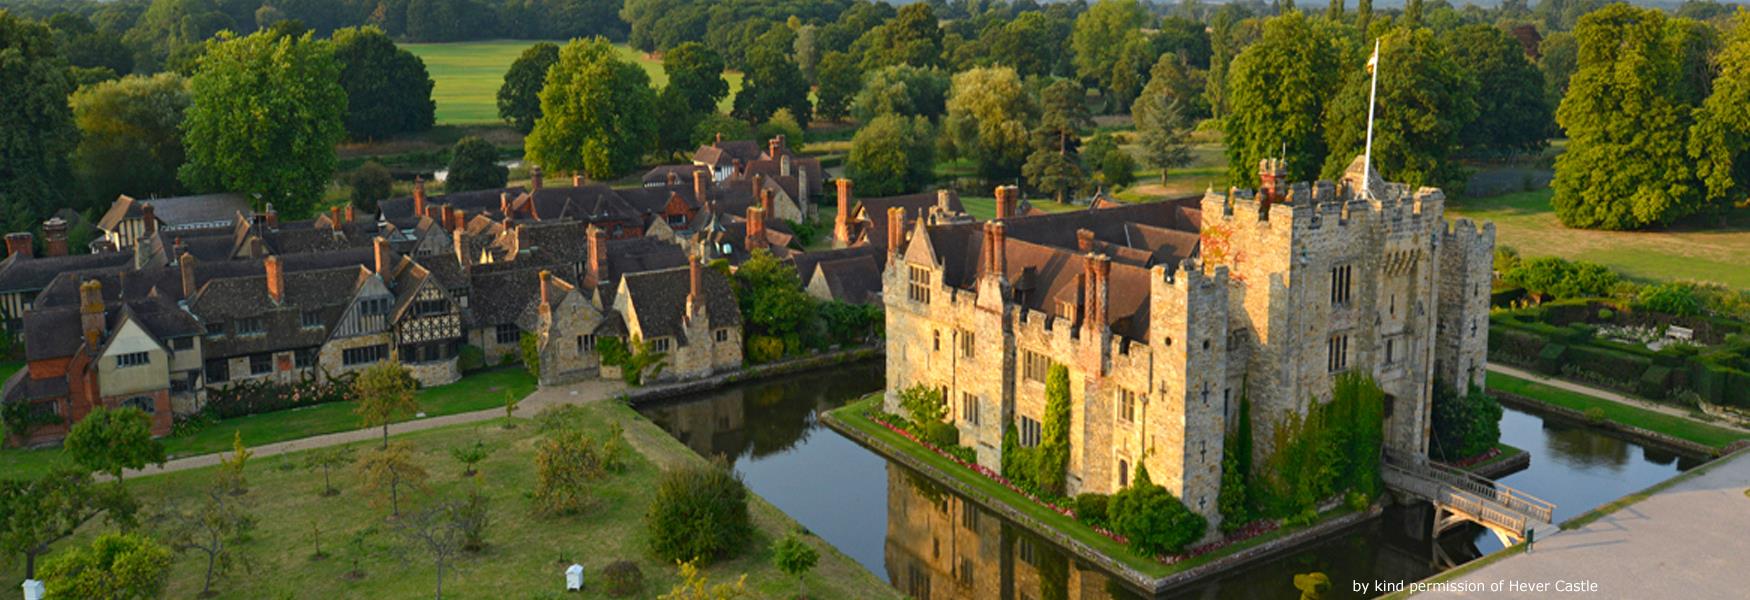 Hever Castle Less than 1 hour from Maidstone